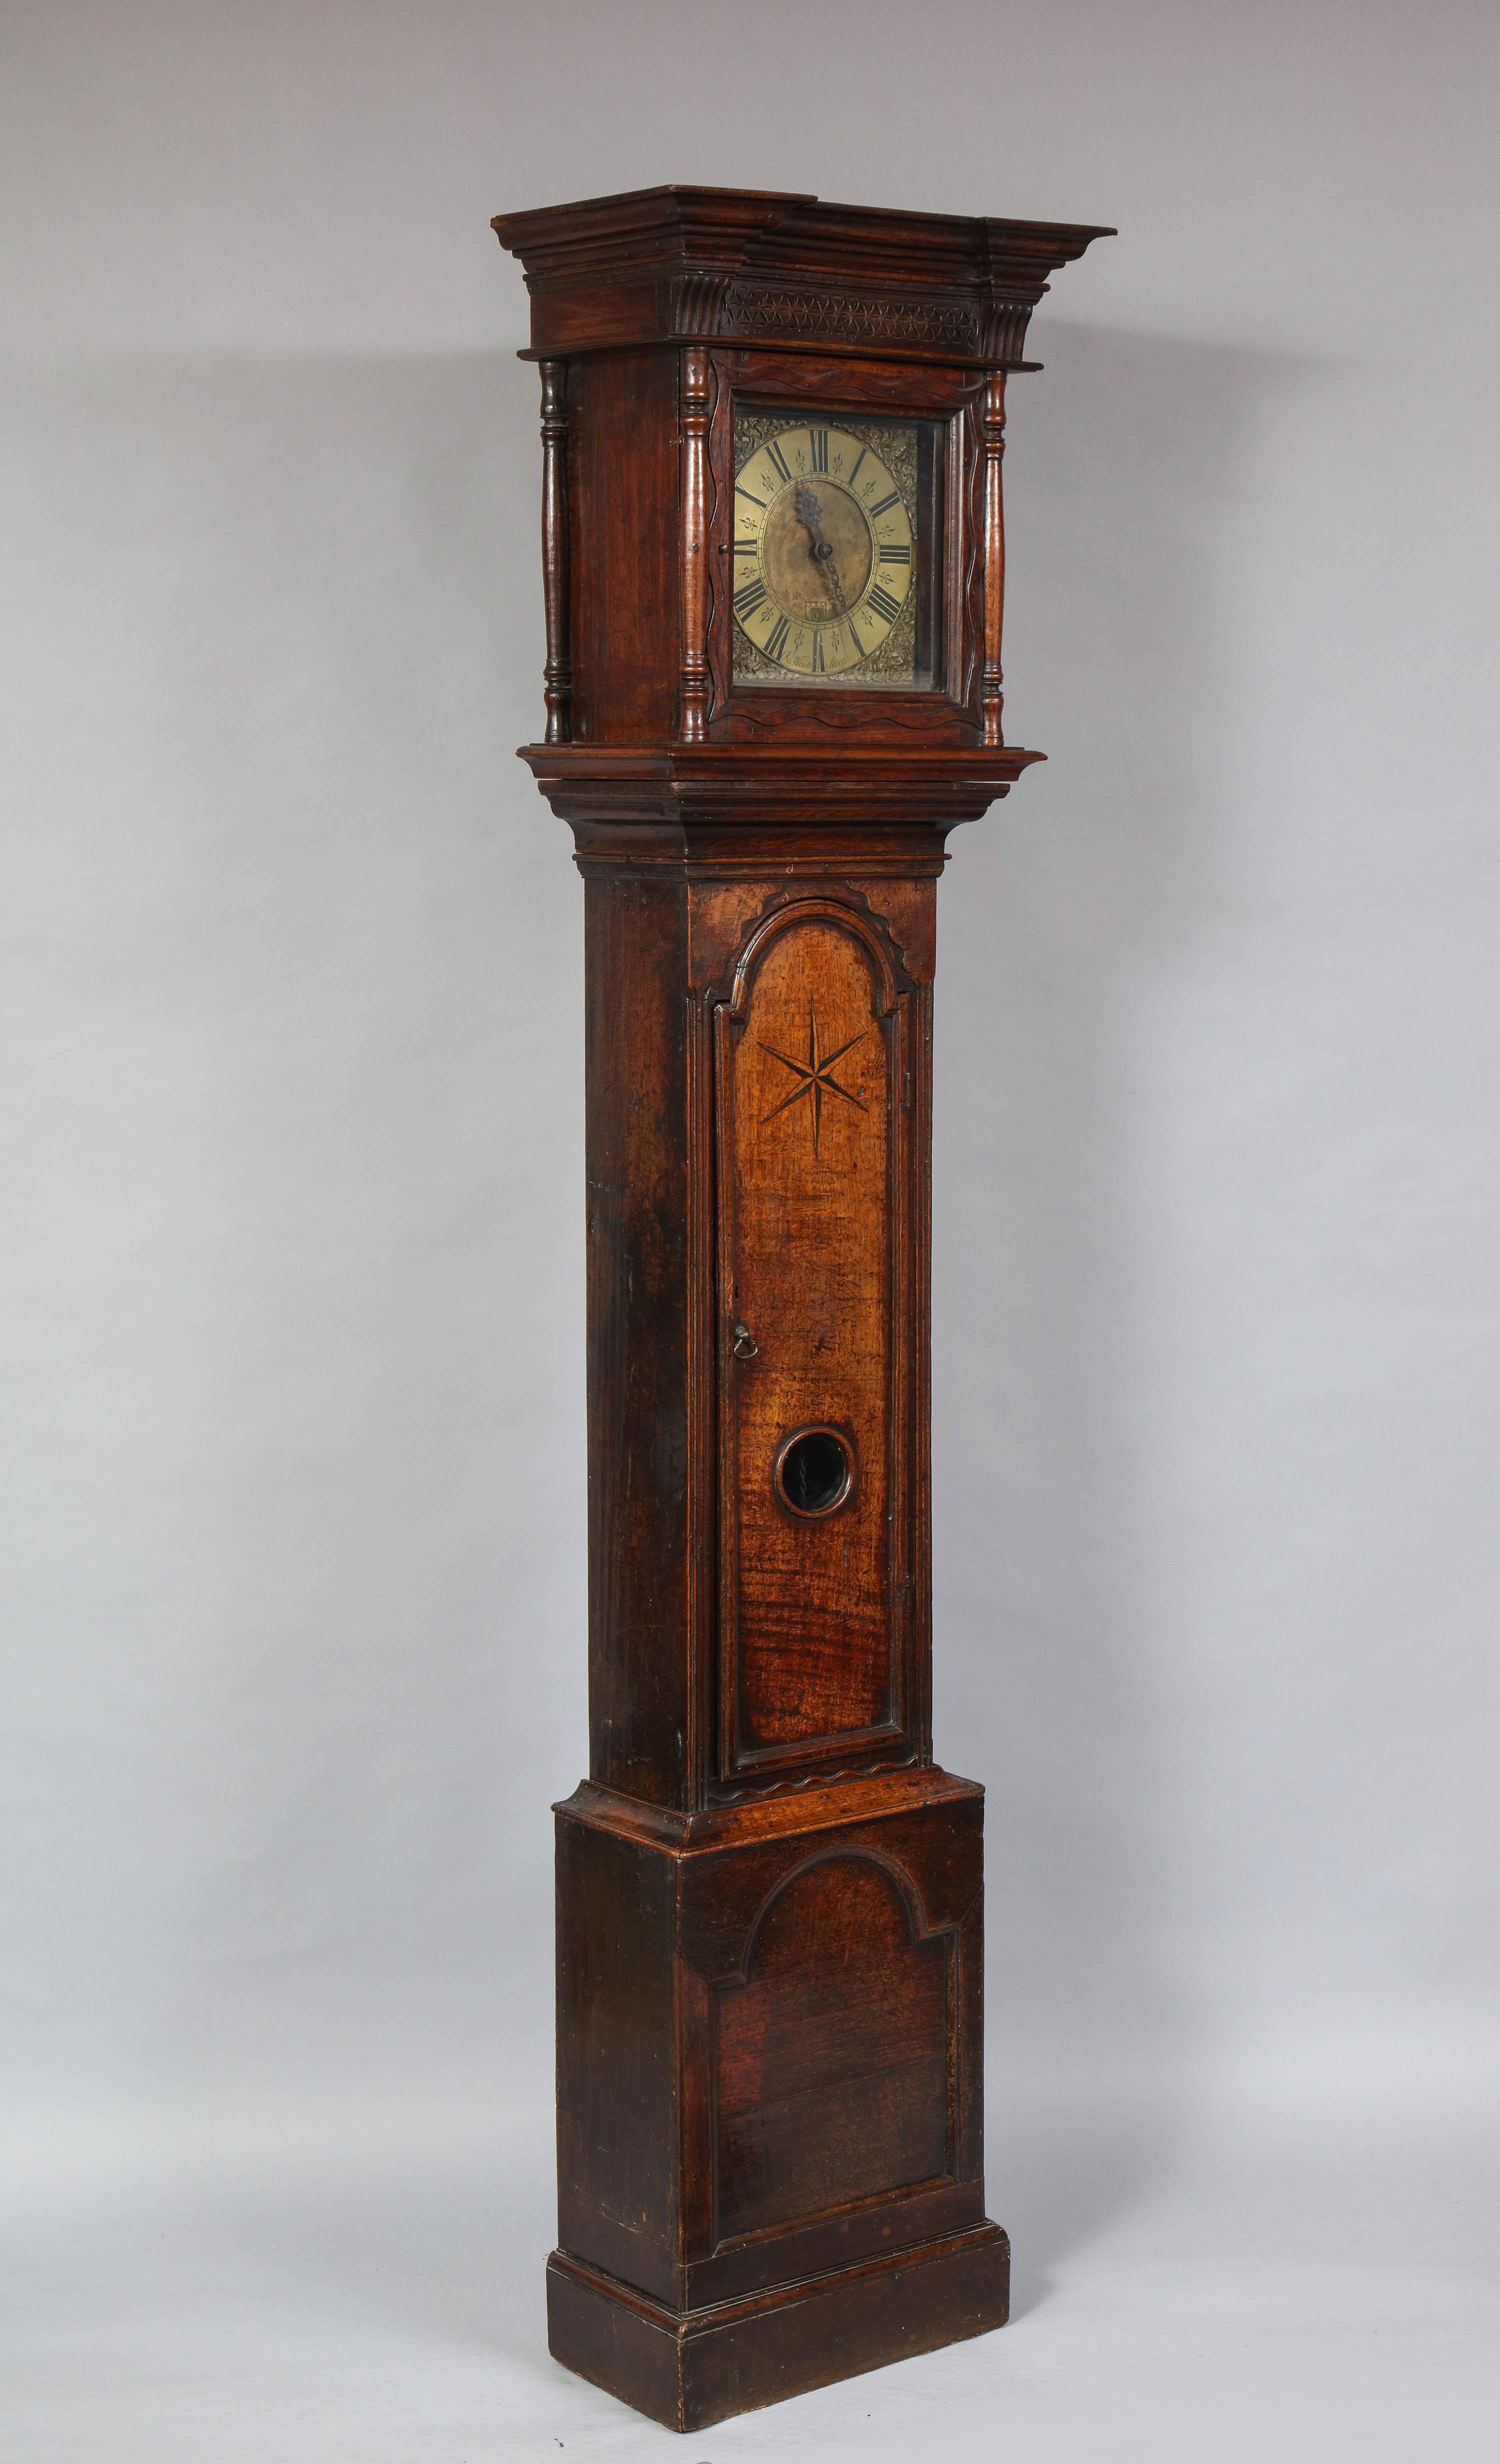 Very fine early 18th century oak cased brass dial clock by Richard Wood. This highly unusual and characterful case showing many quirks found in Welsh and Shropshire furniture and its not surprising to find the movement was made by one of the leading